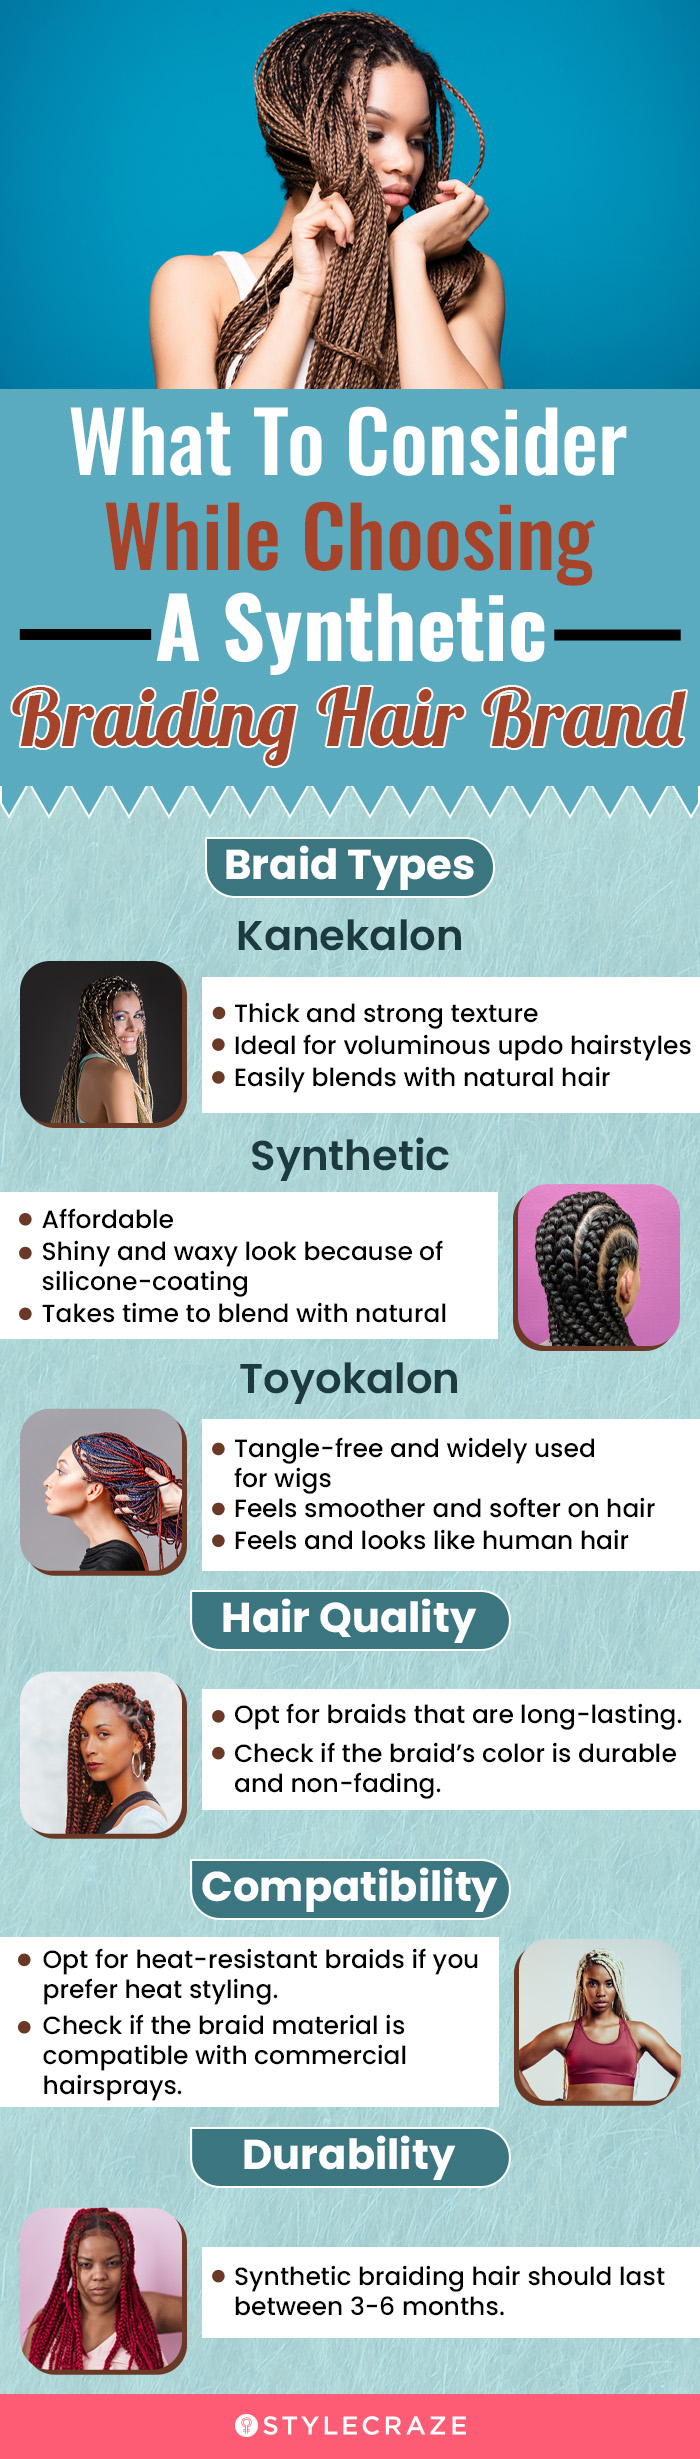 What To Consider While Choosing A Synthetic Braiding Hair (infographic)